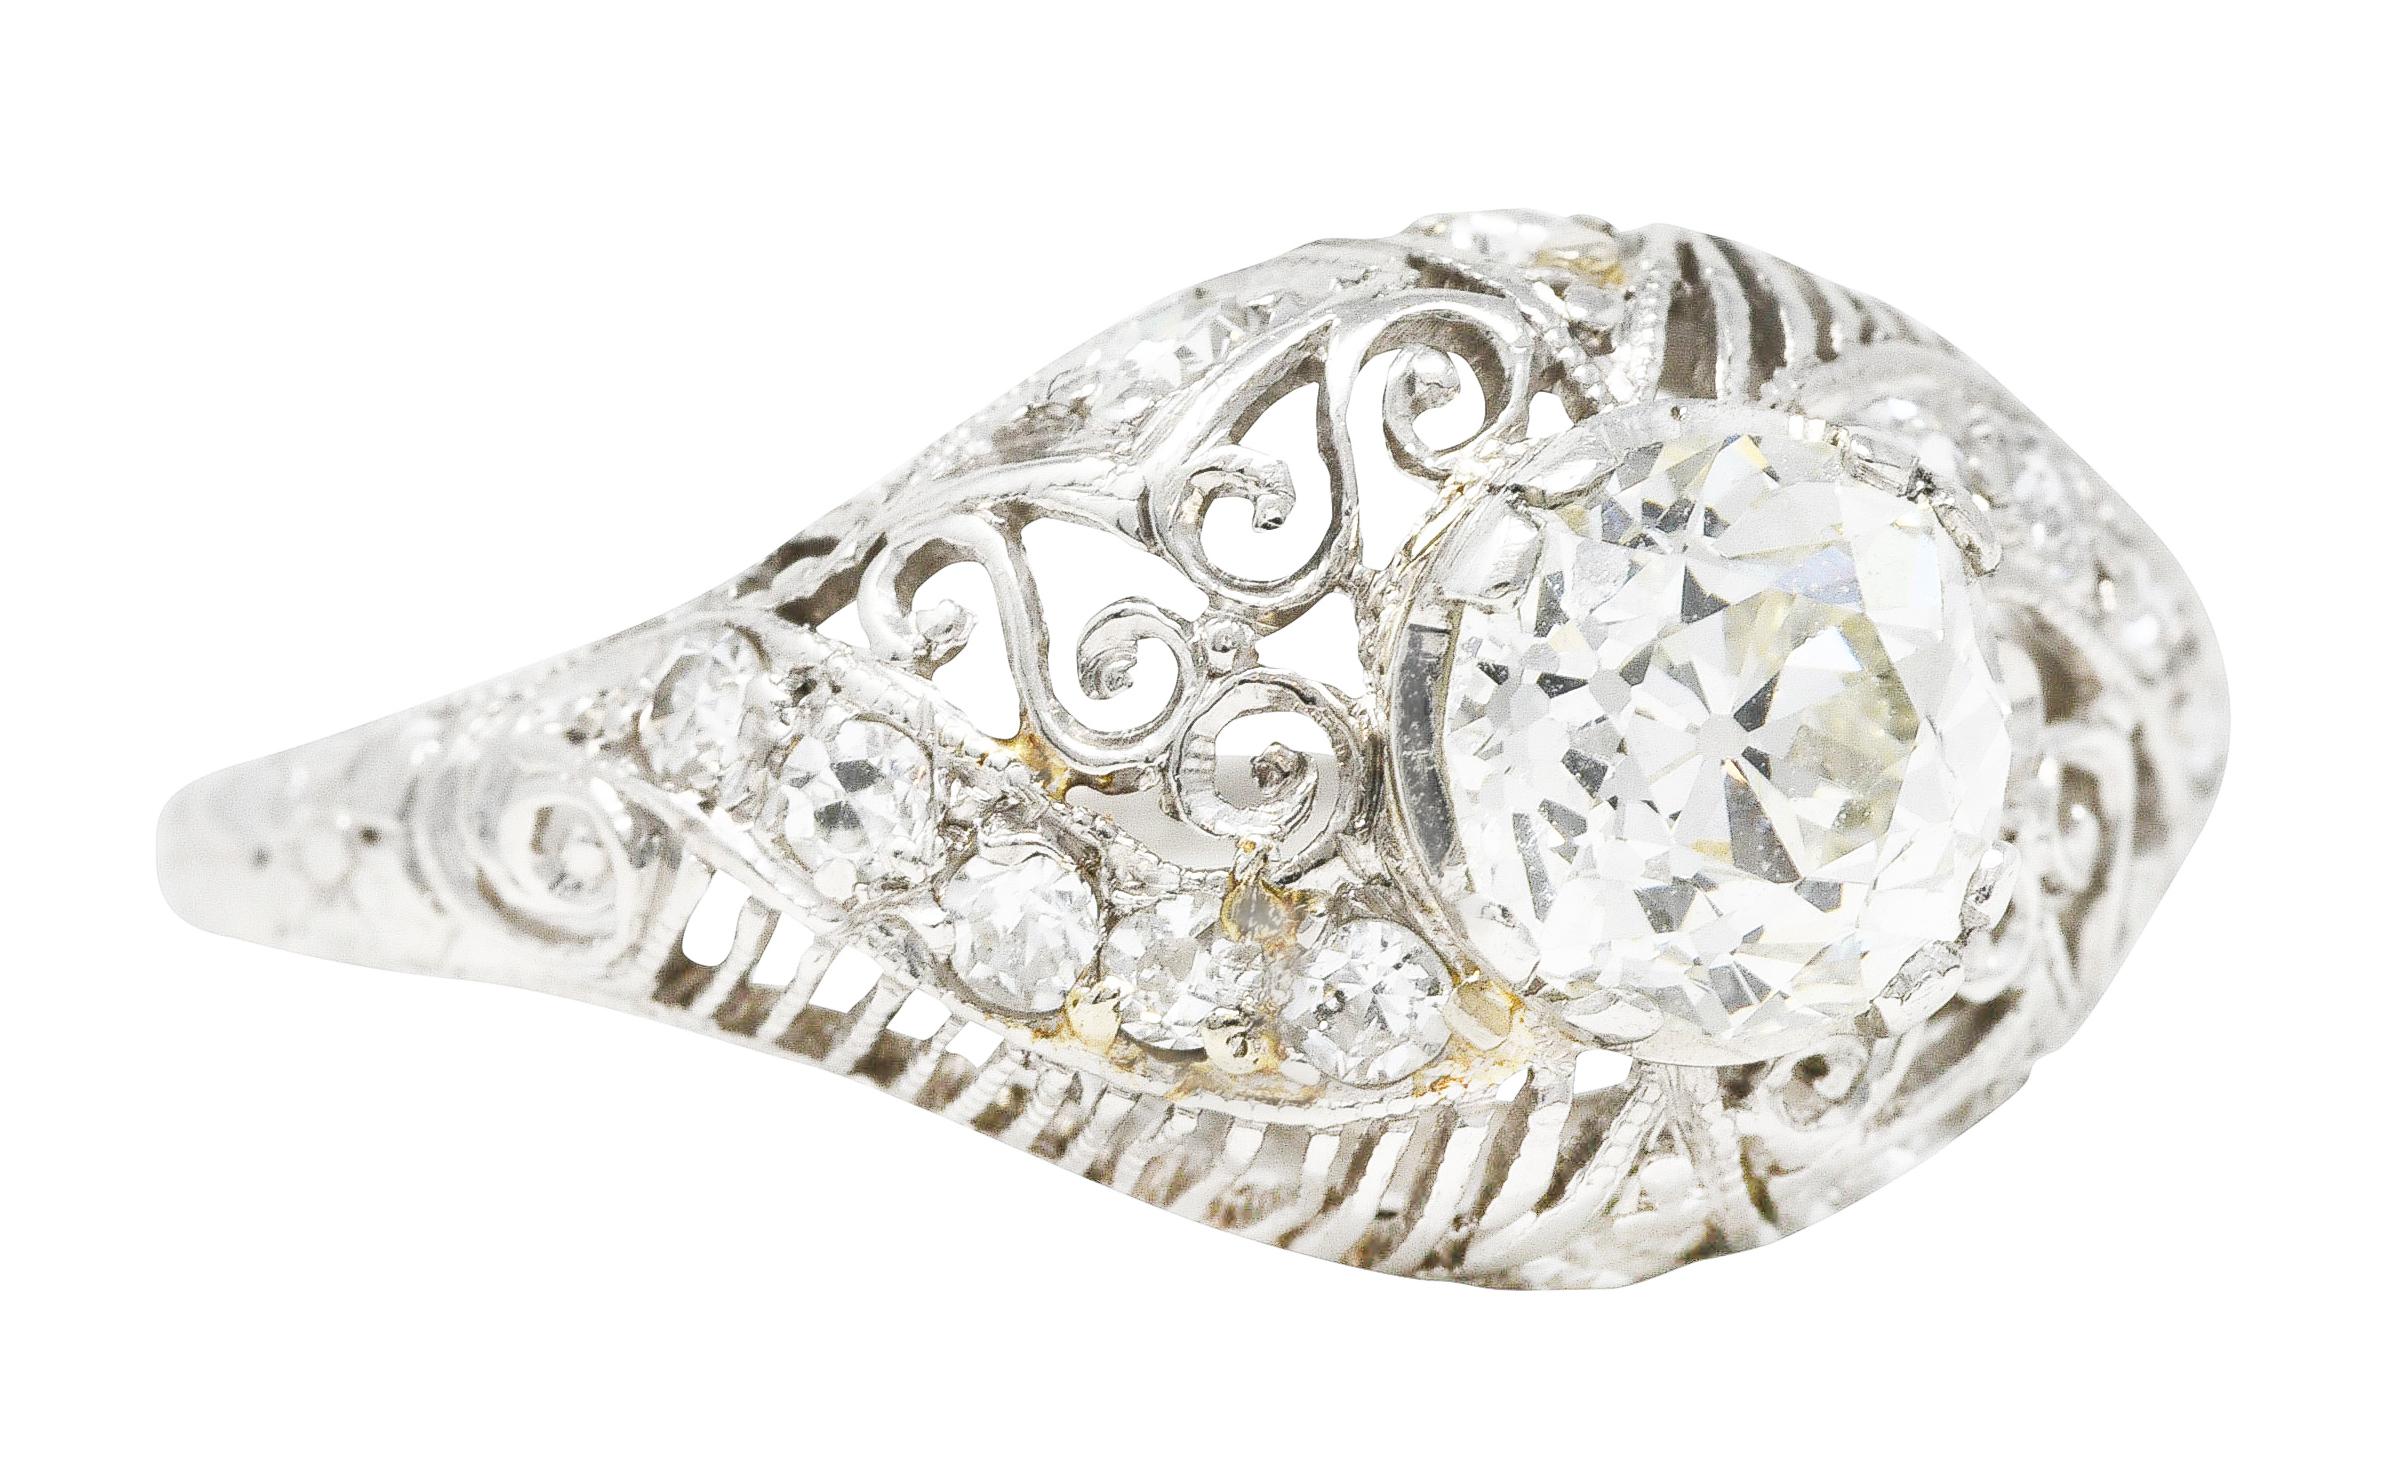 Bombè band ring is pierced with linear striation alternating with scrolled filigree. Centering an old mine cut diamond weighing 0.95 carat - J color with VS2 clarity. With single cut diamond accents weighing collectively approximately 0.30 - eye